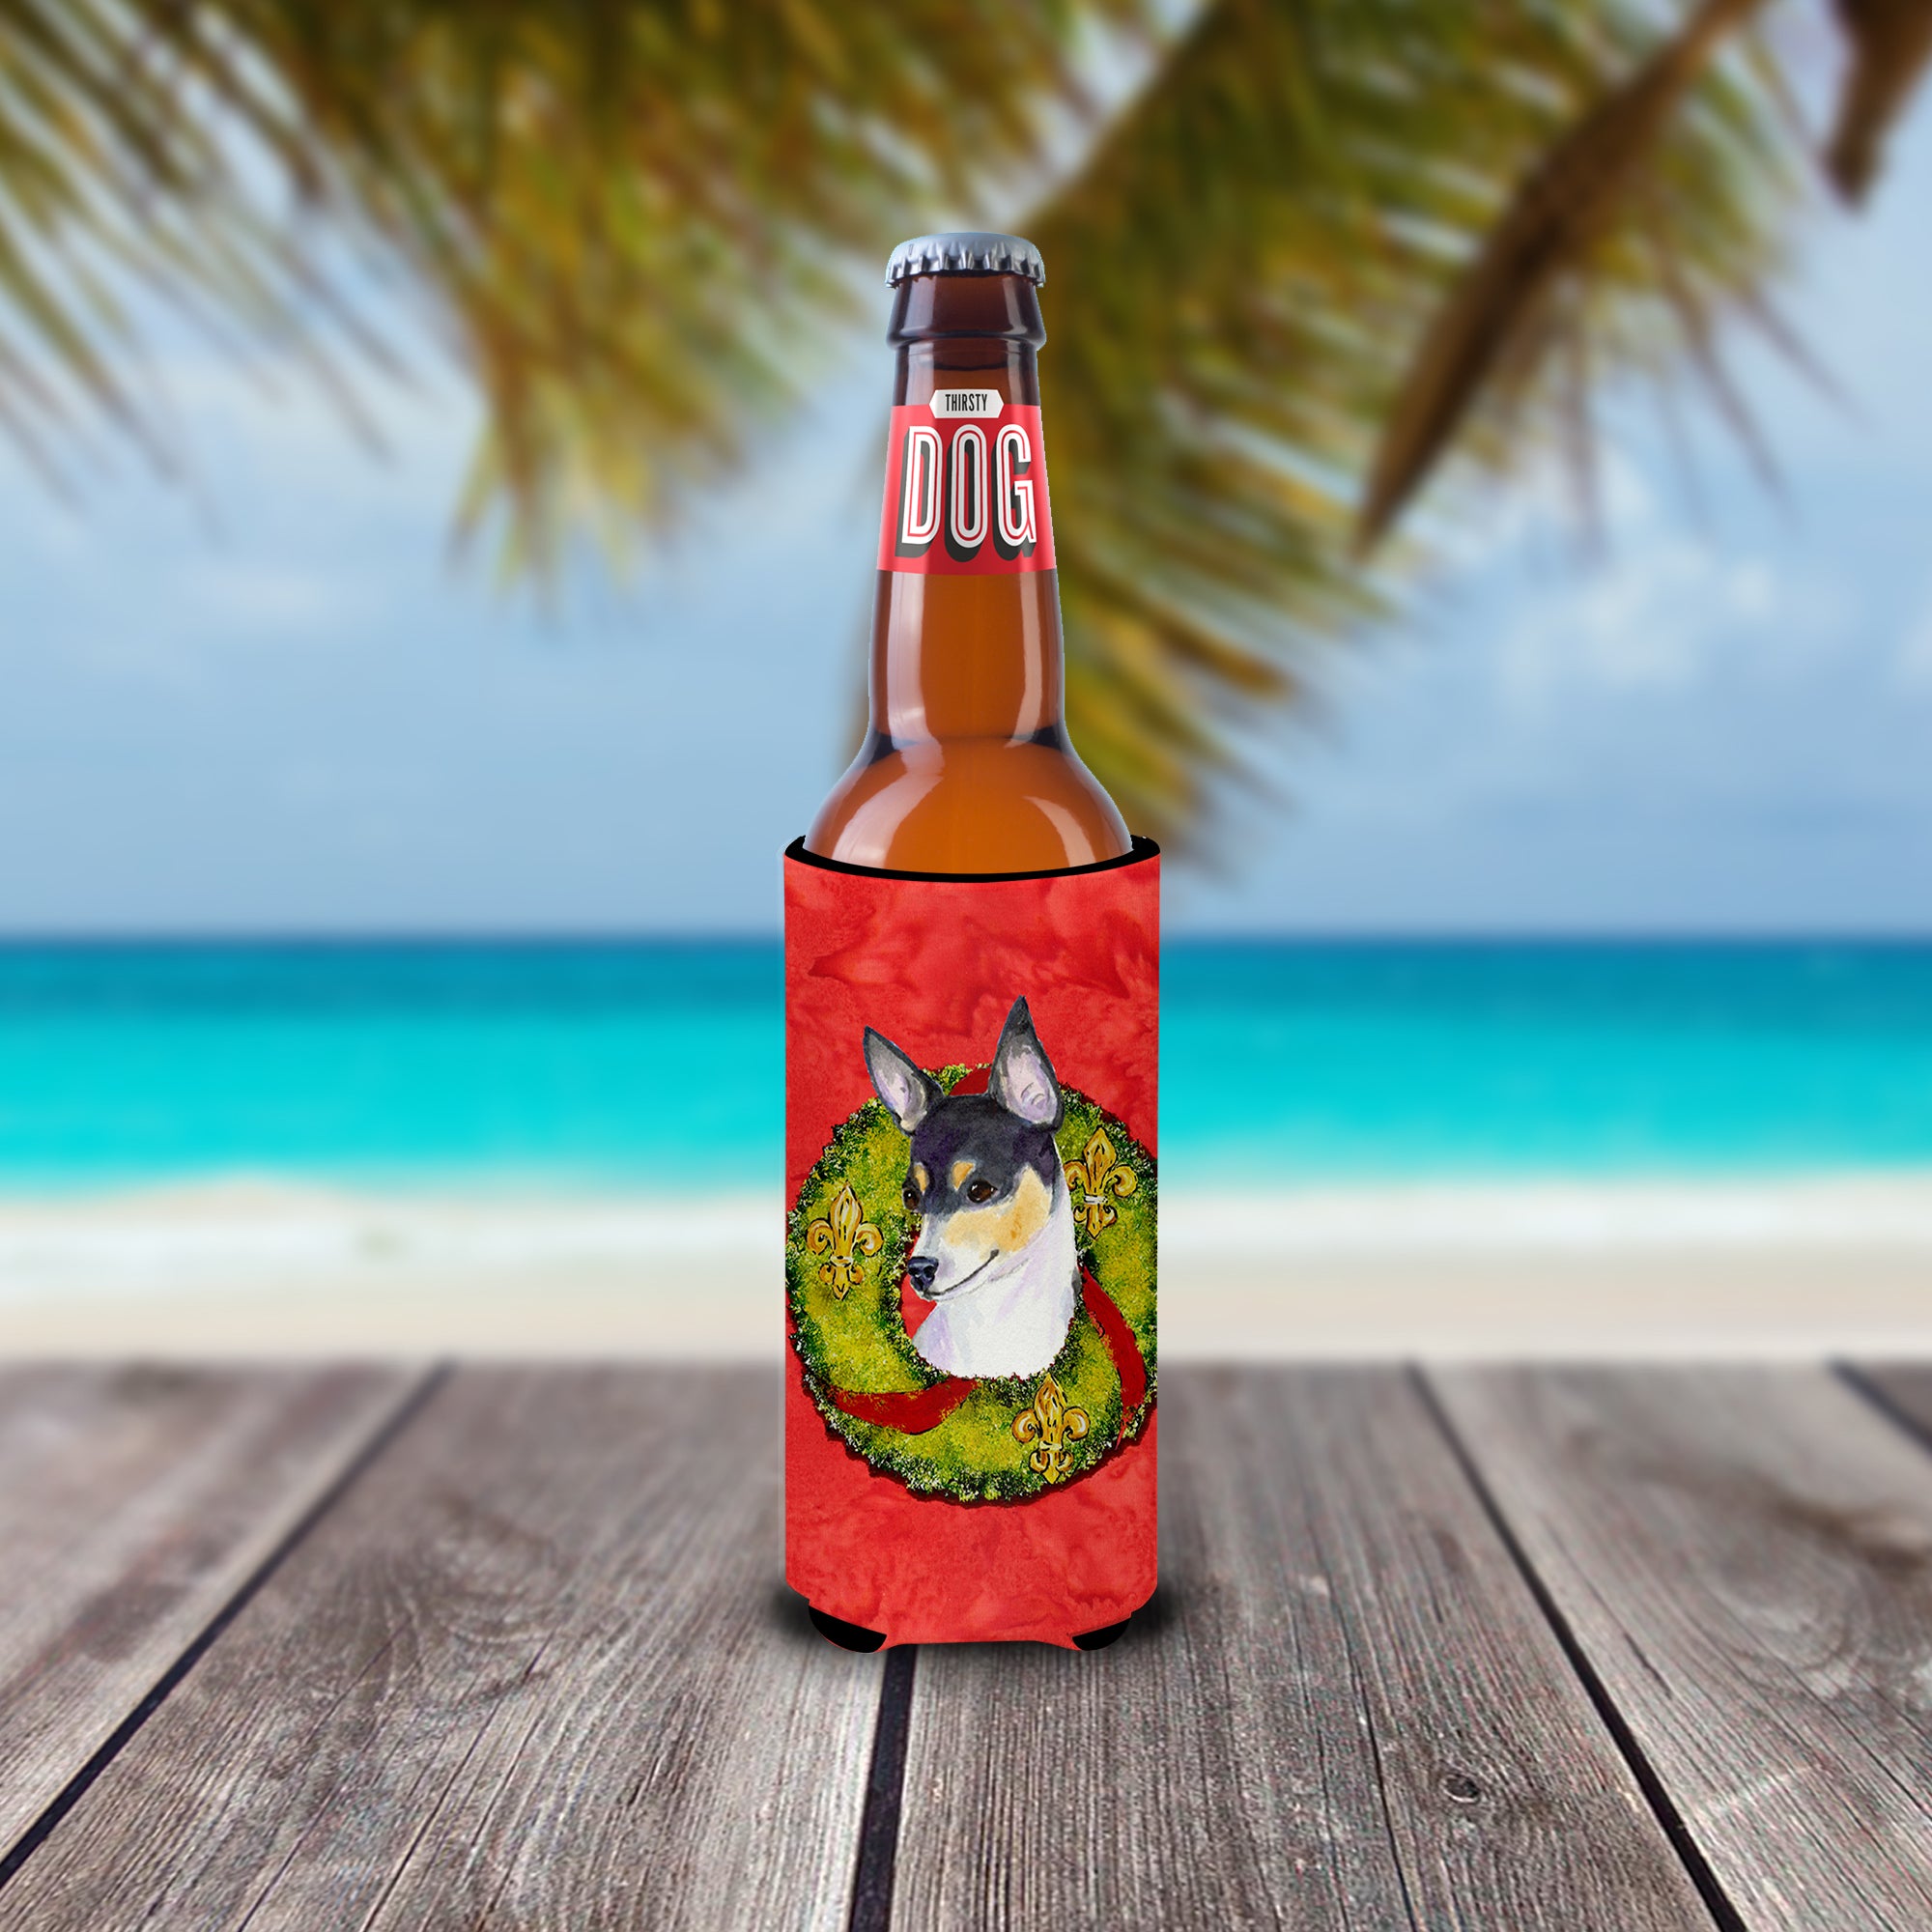 Fox Terrier Cristmas Wreath Ultra Beverage Insulators for slim cans SS4205MUK